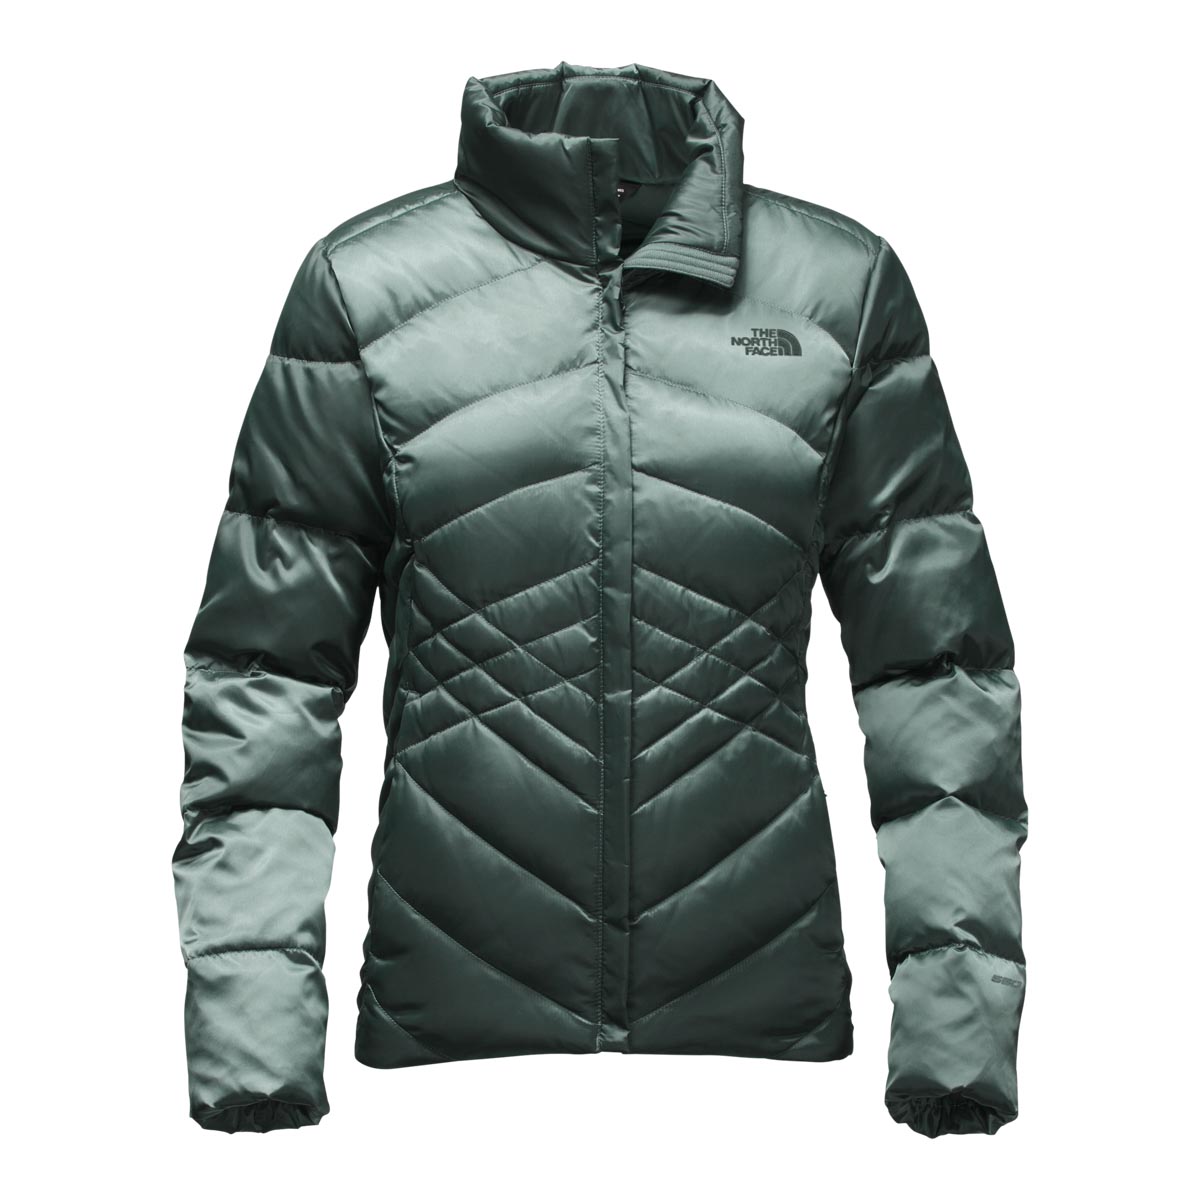 The North Face Women's Aconcagua Jacket Discontinued Pricing